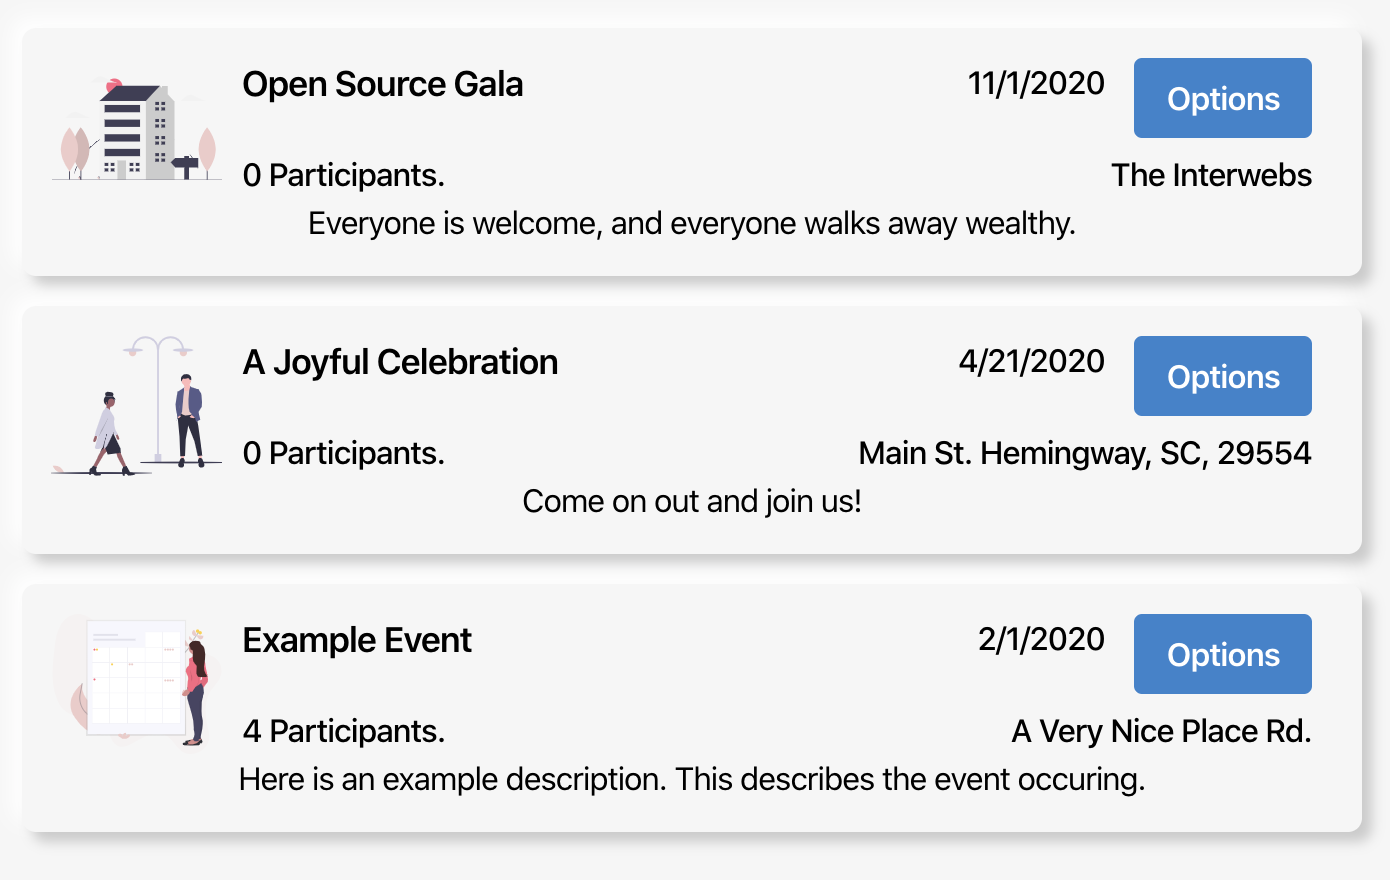 A few example events